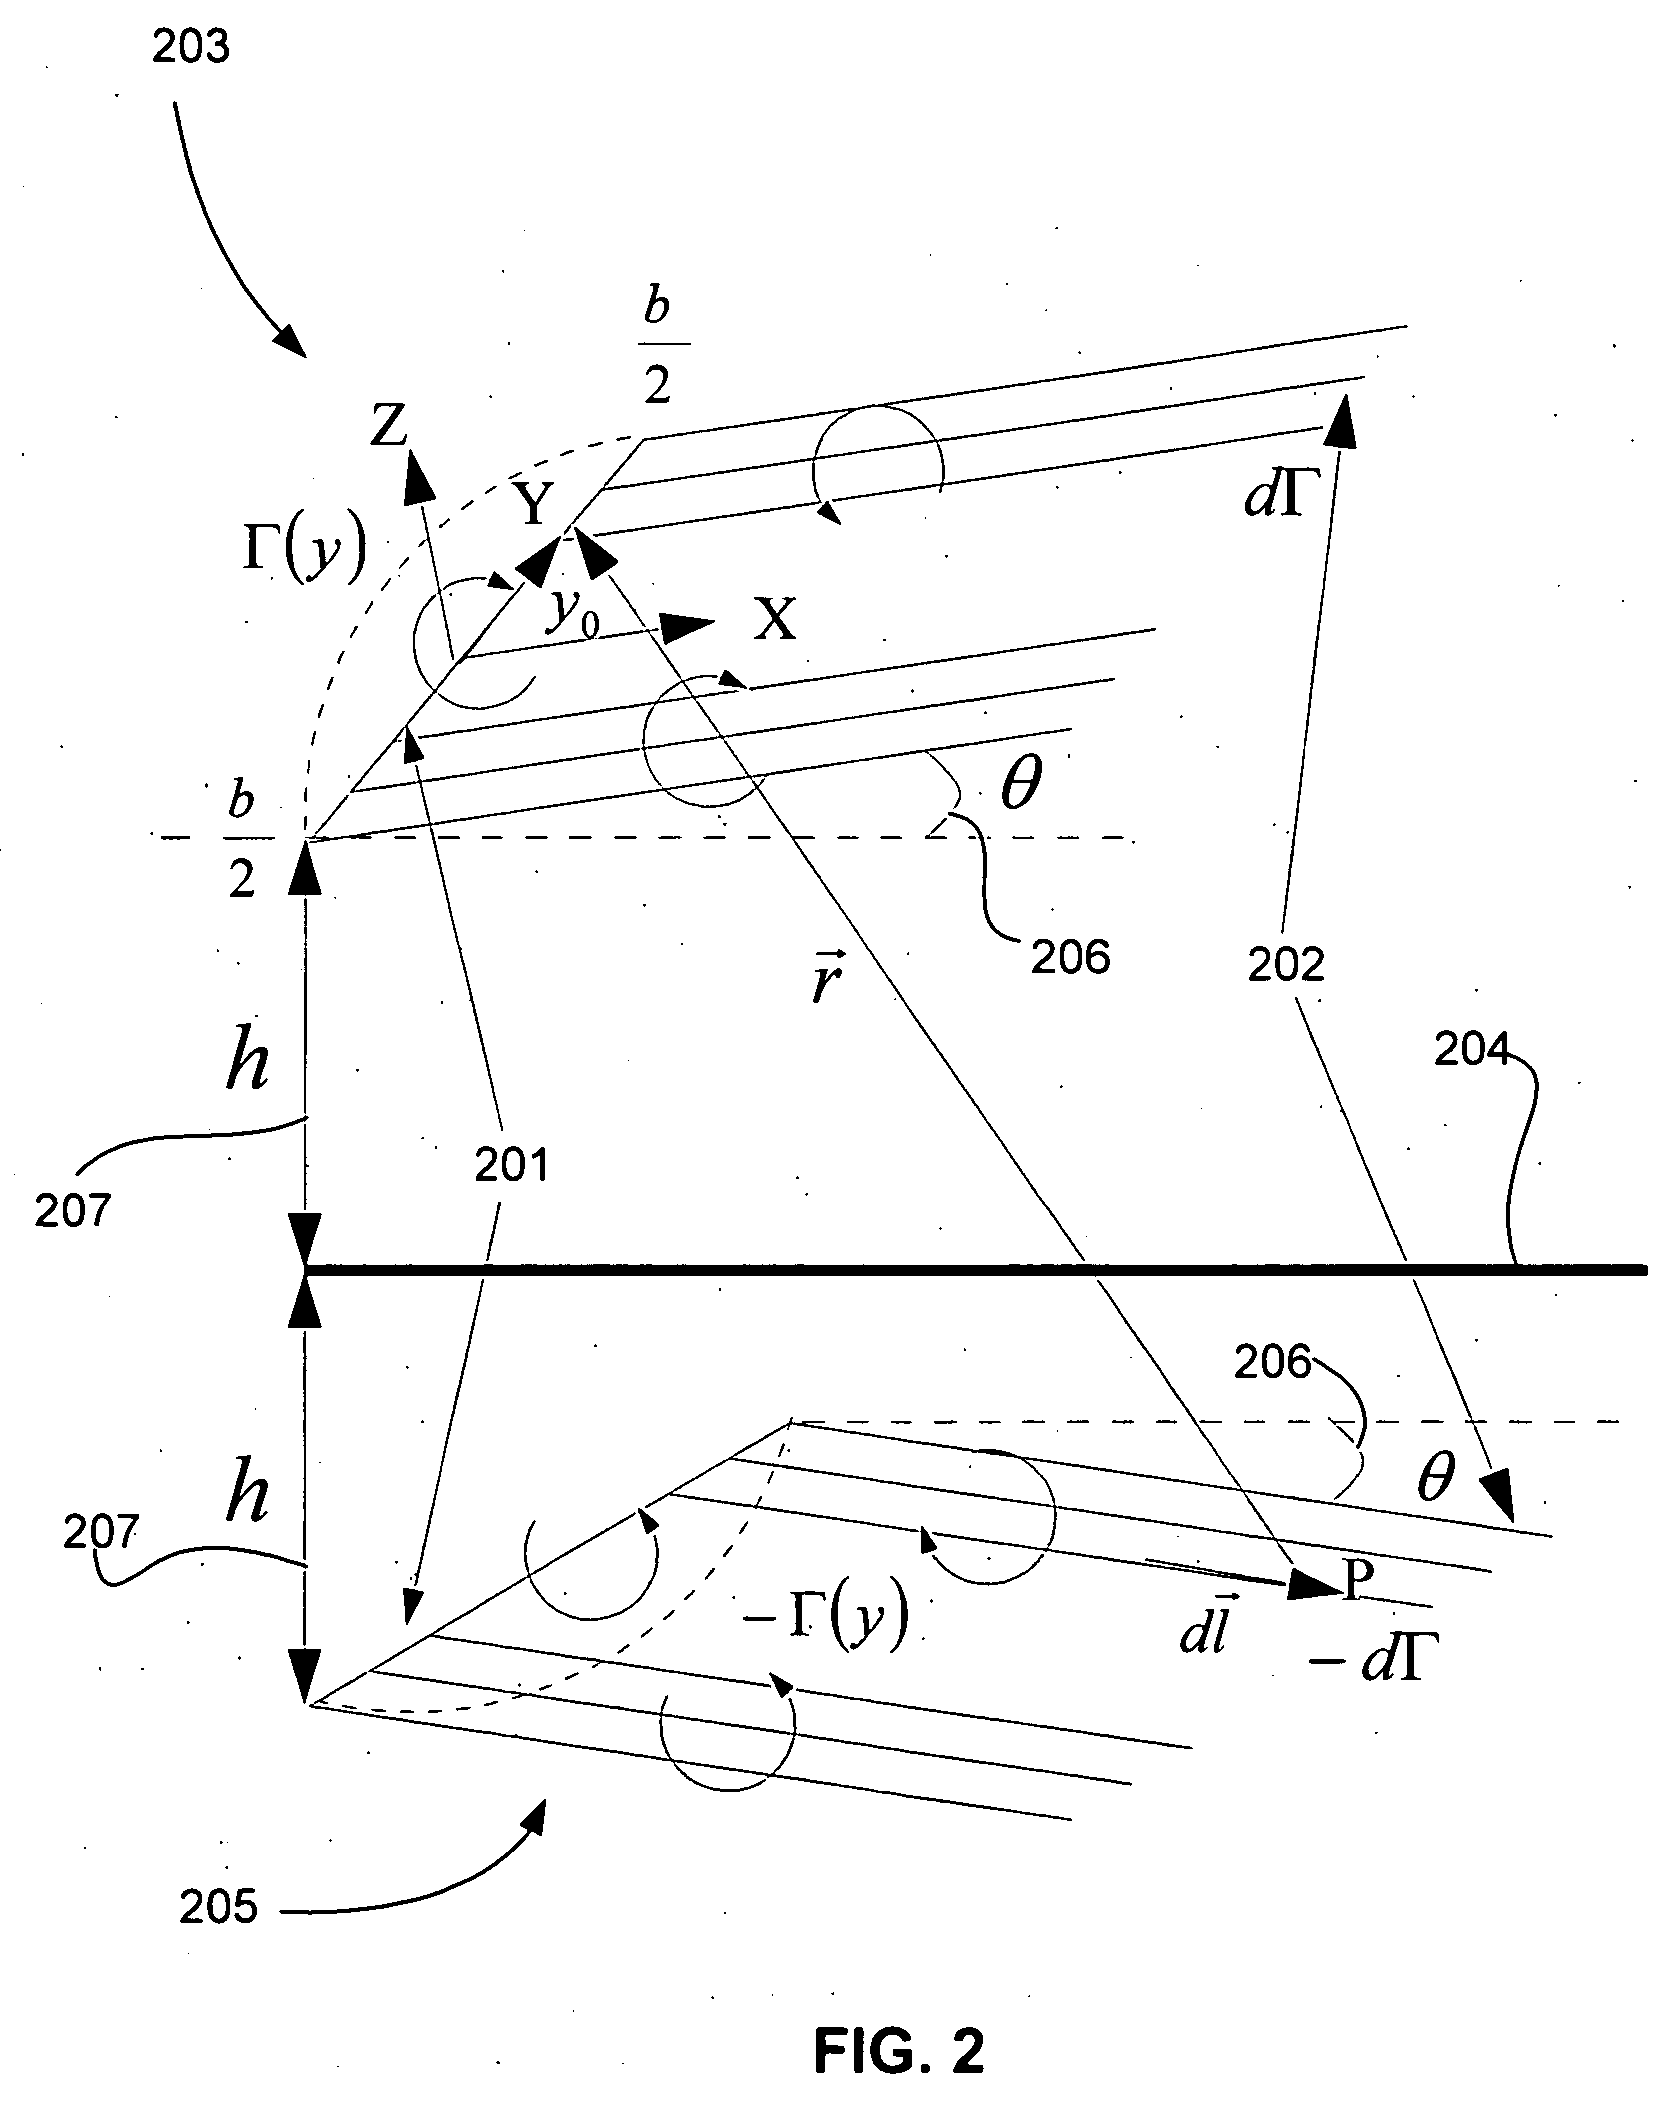 Prediction of dynamic ground effect forces for fixed wing aircraft